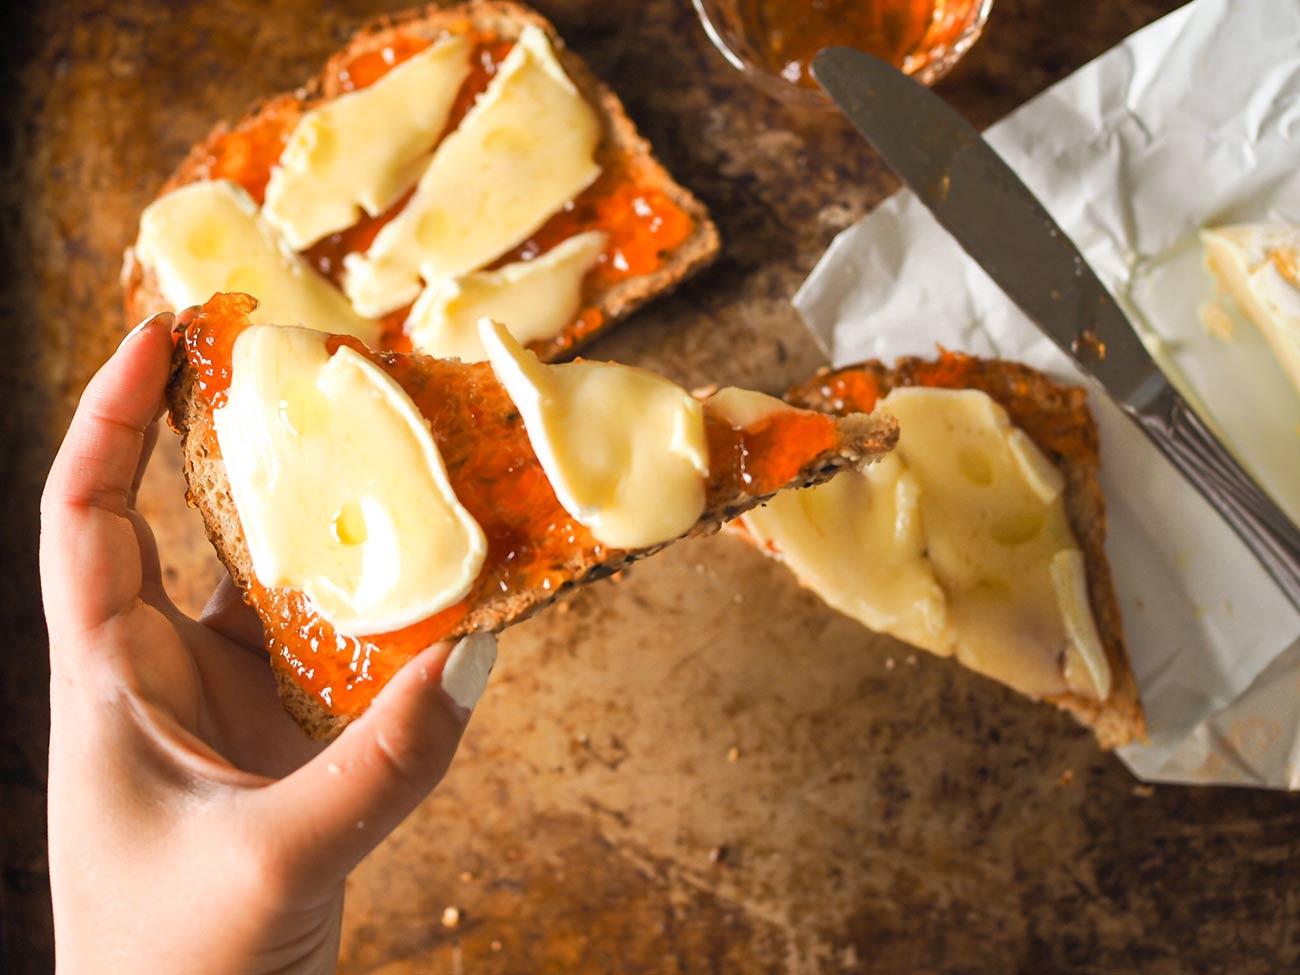 brie and red pepper jelly with truffle oil